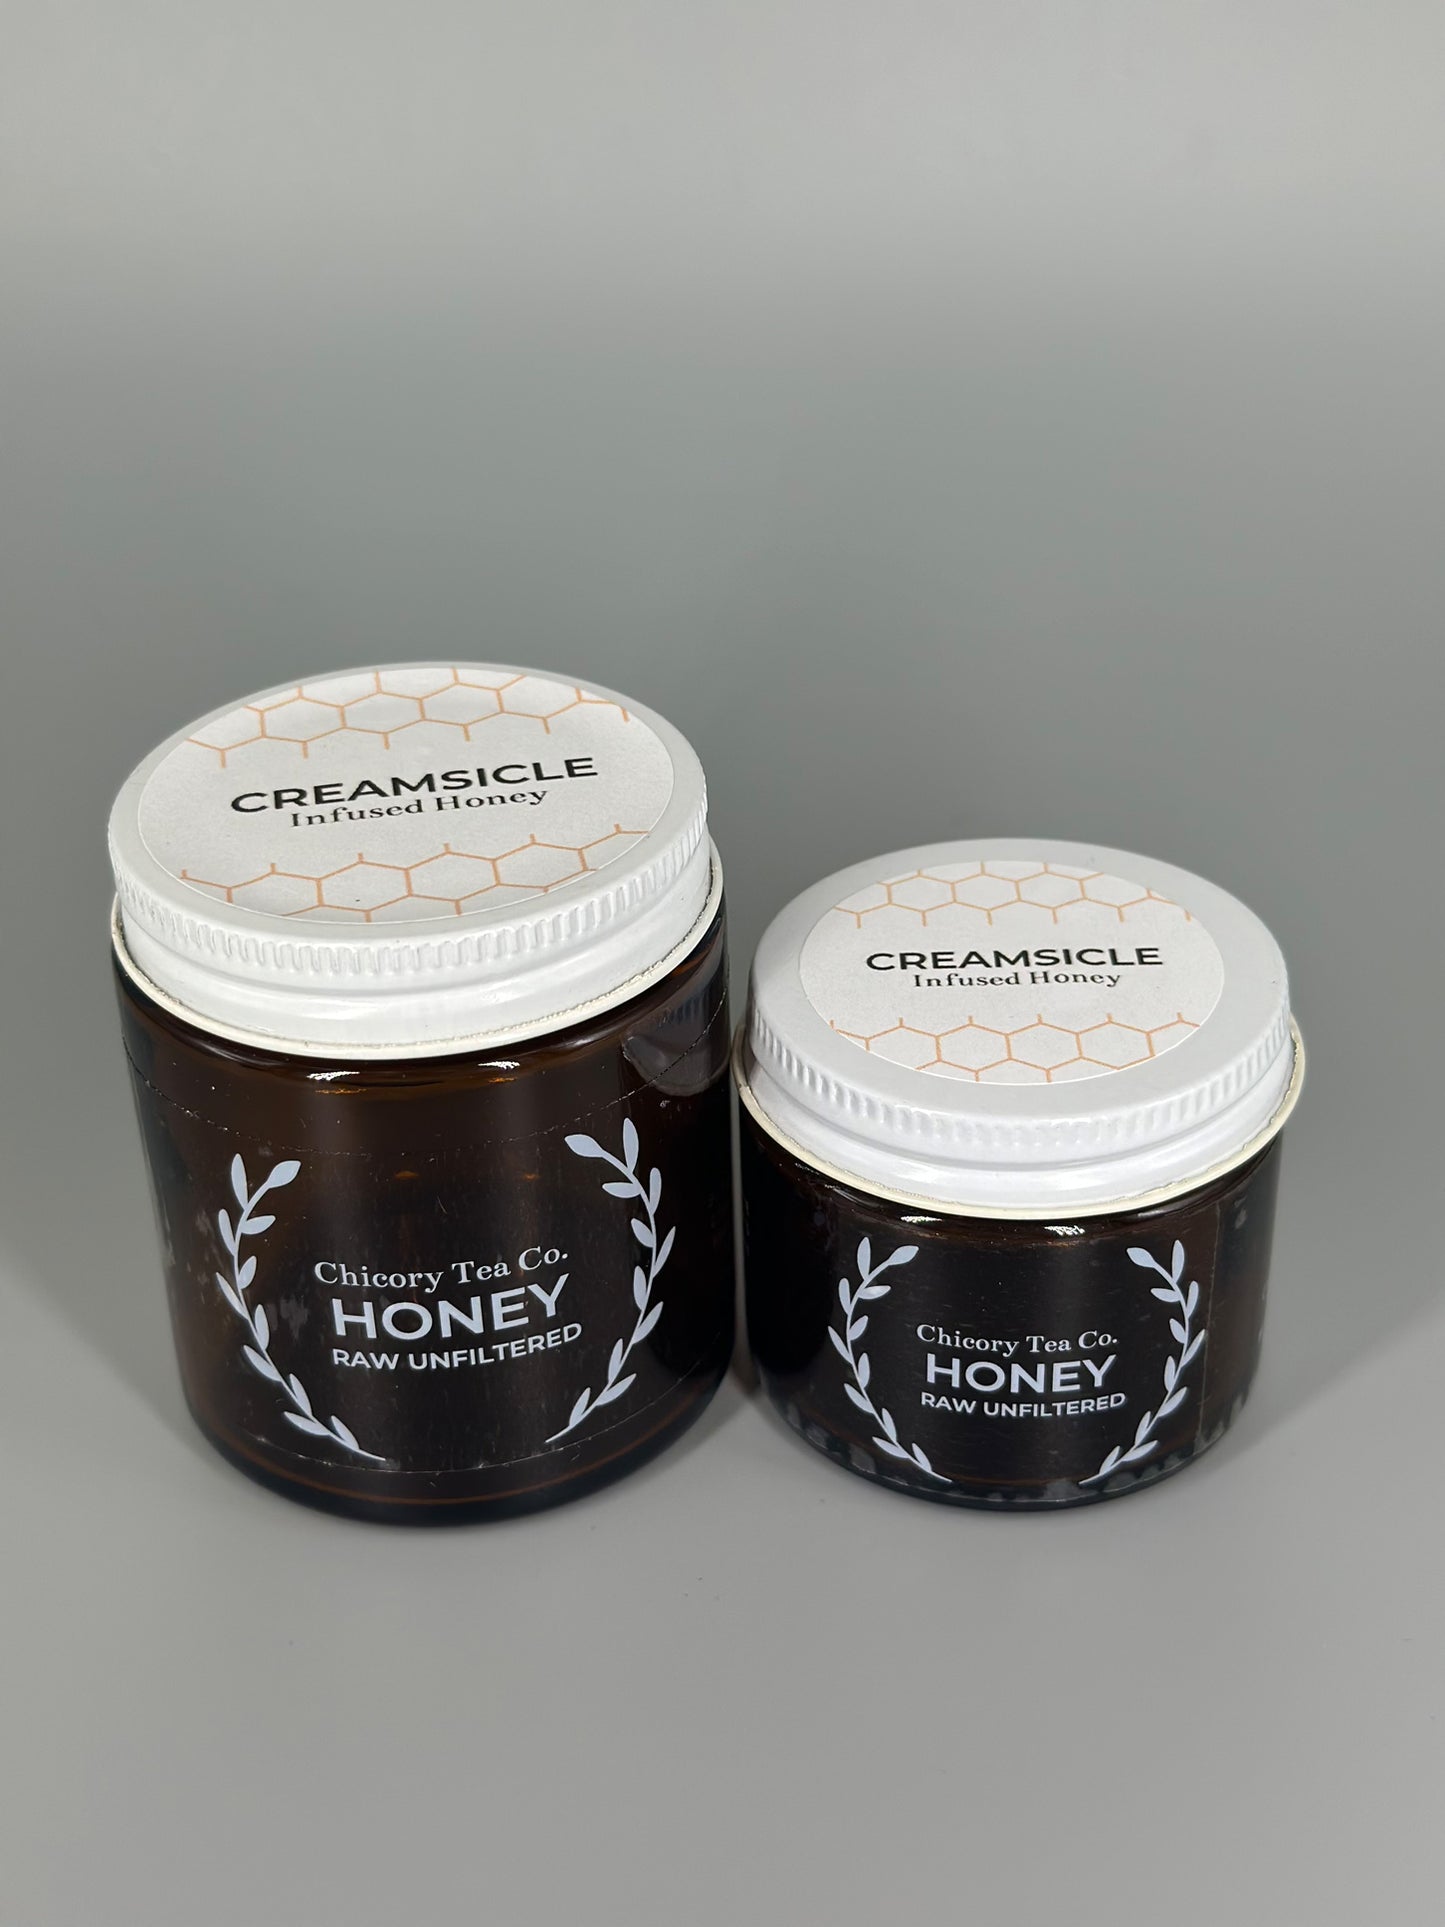 Chicory Tea Co.'s Creamsicle Honey in 2oz and 4oz jars, view from the front